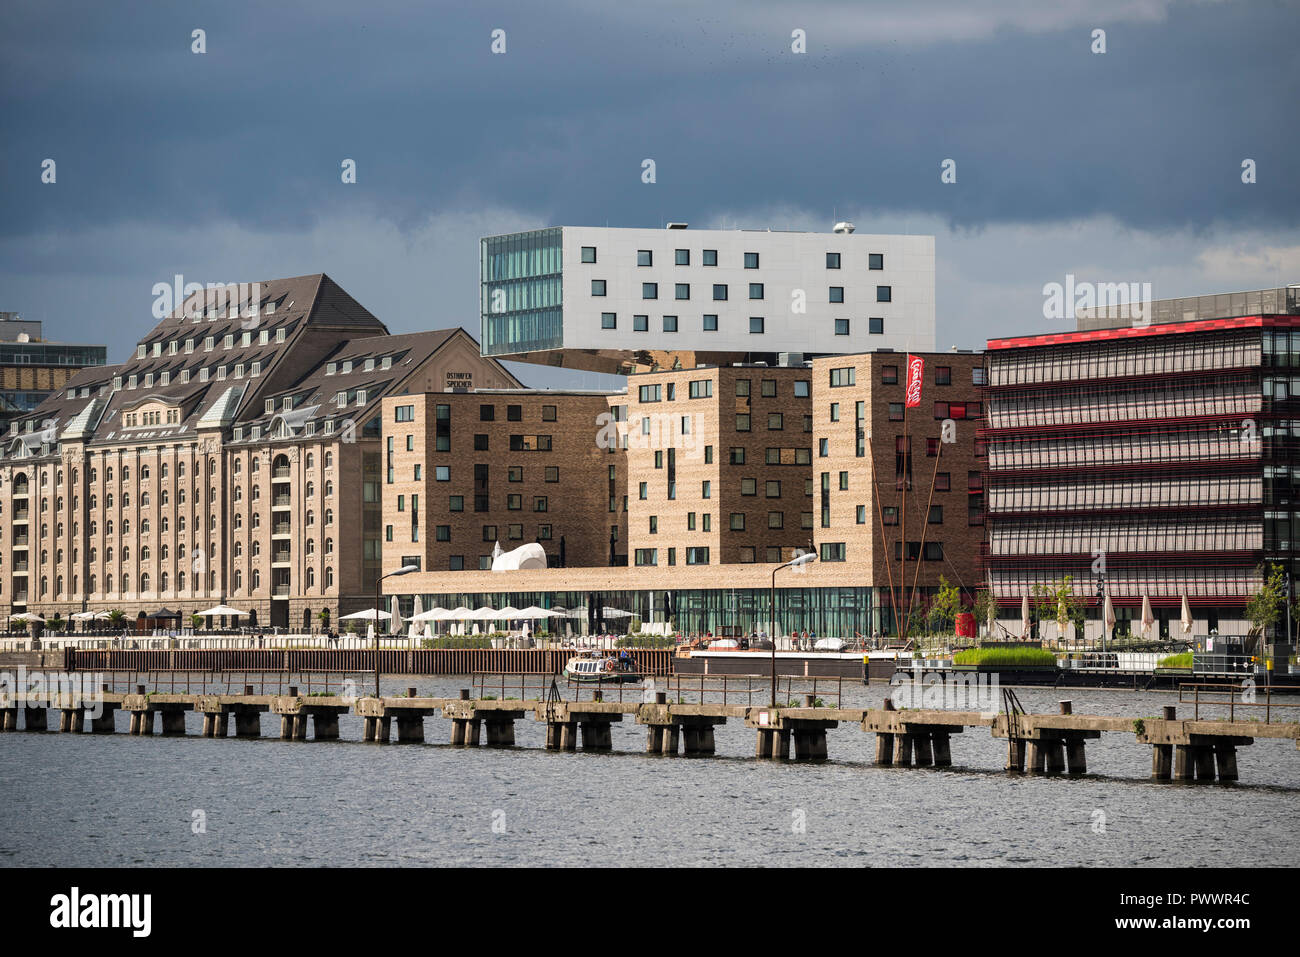 Berlin. Germany. Buildings on the redeveloped Osthafen (East Harbour) on the River Spree, Friedrichschain. L-R; Spreespeicher, Hotel Nhow, Coca Cola H Stock Photo